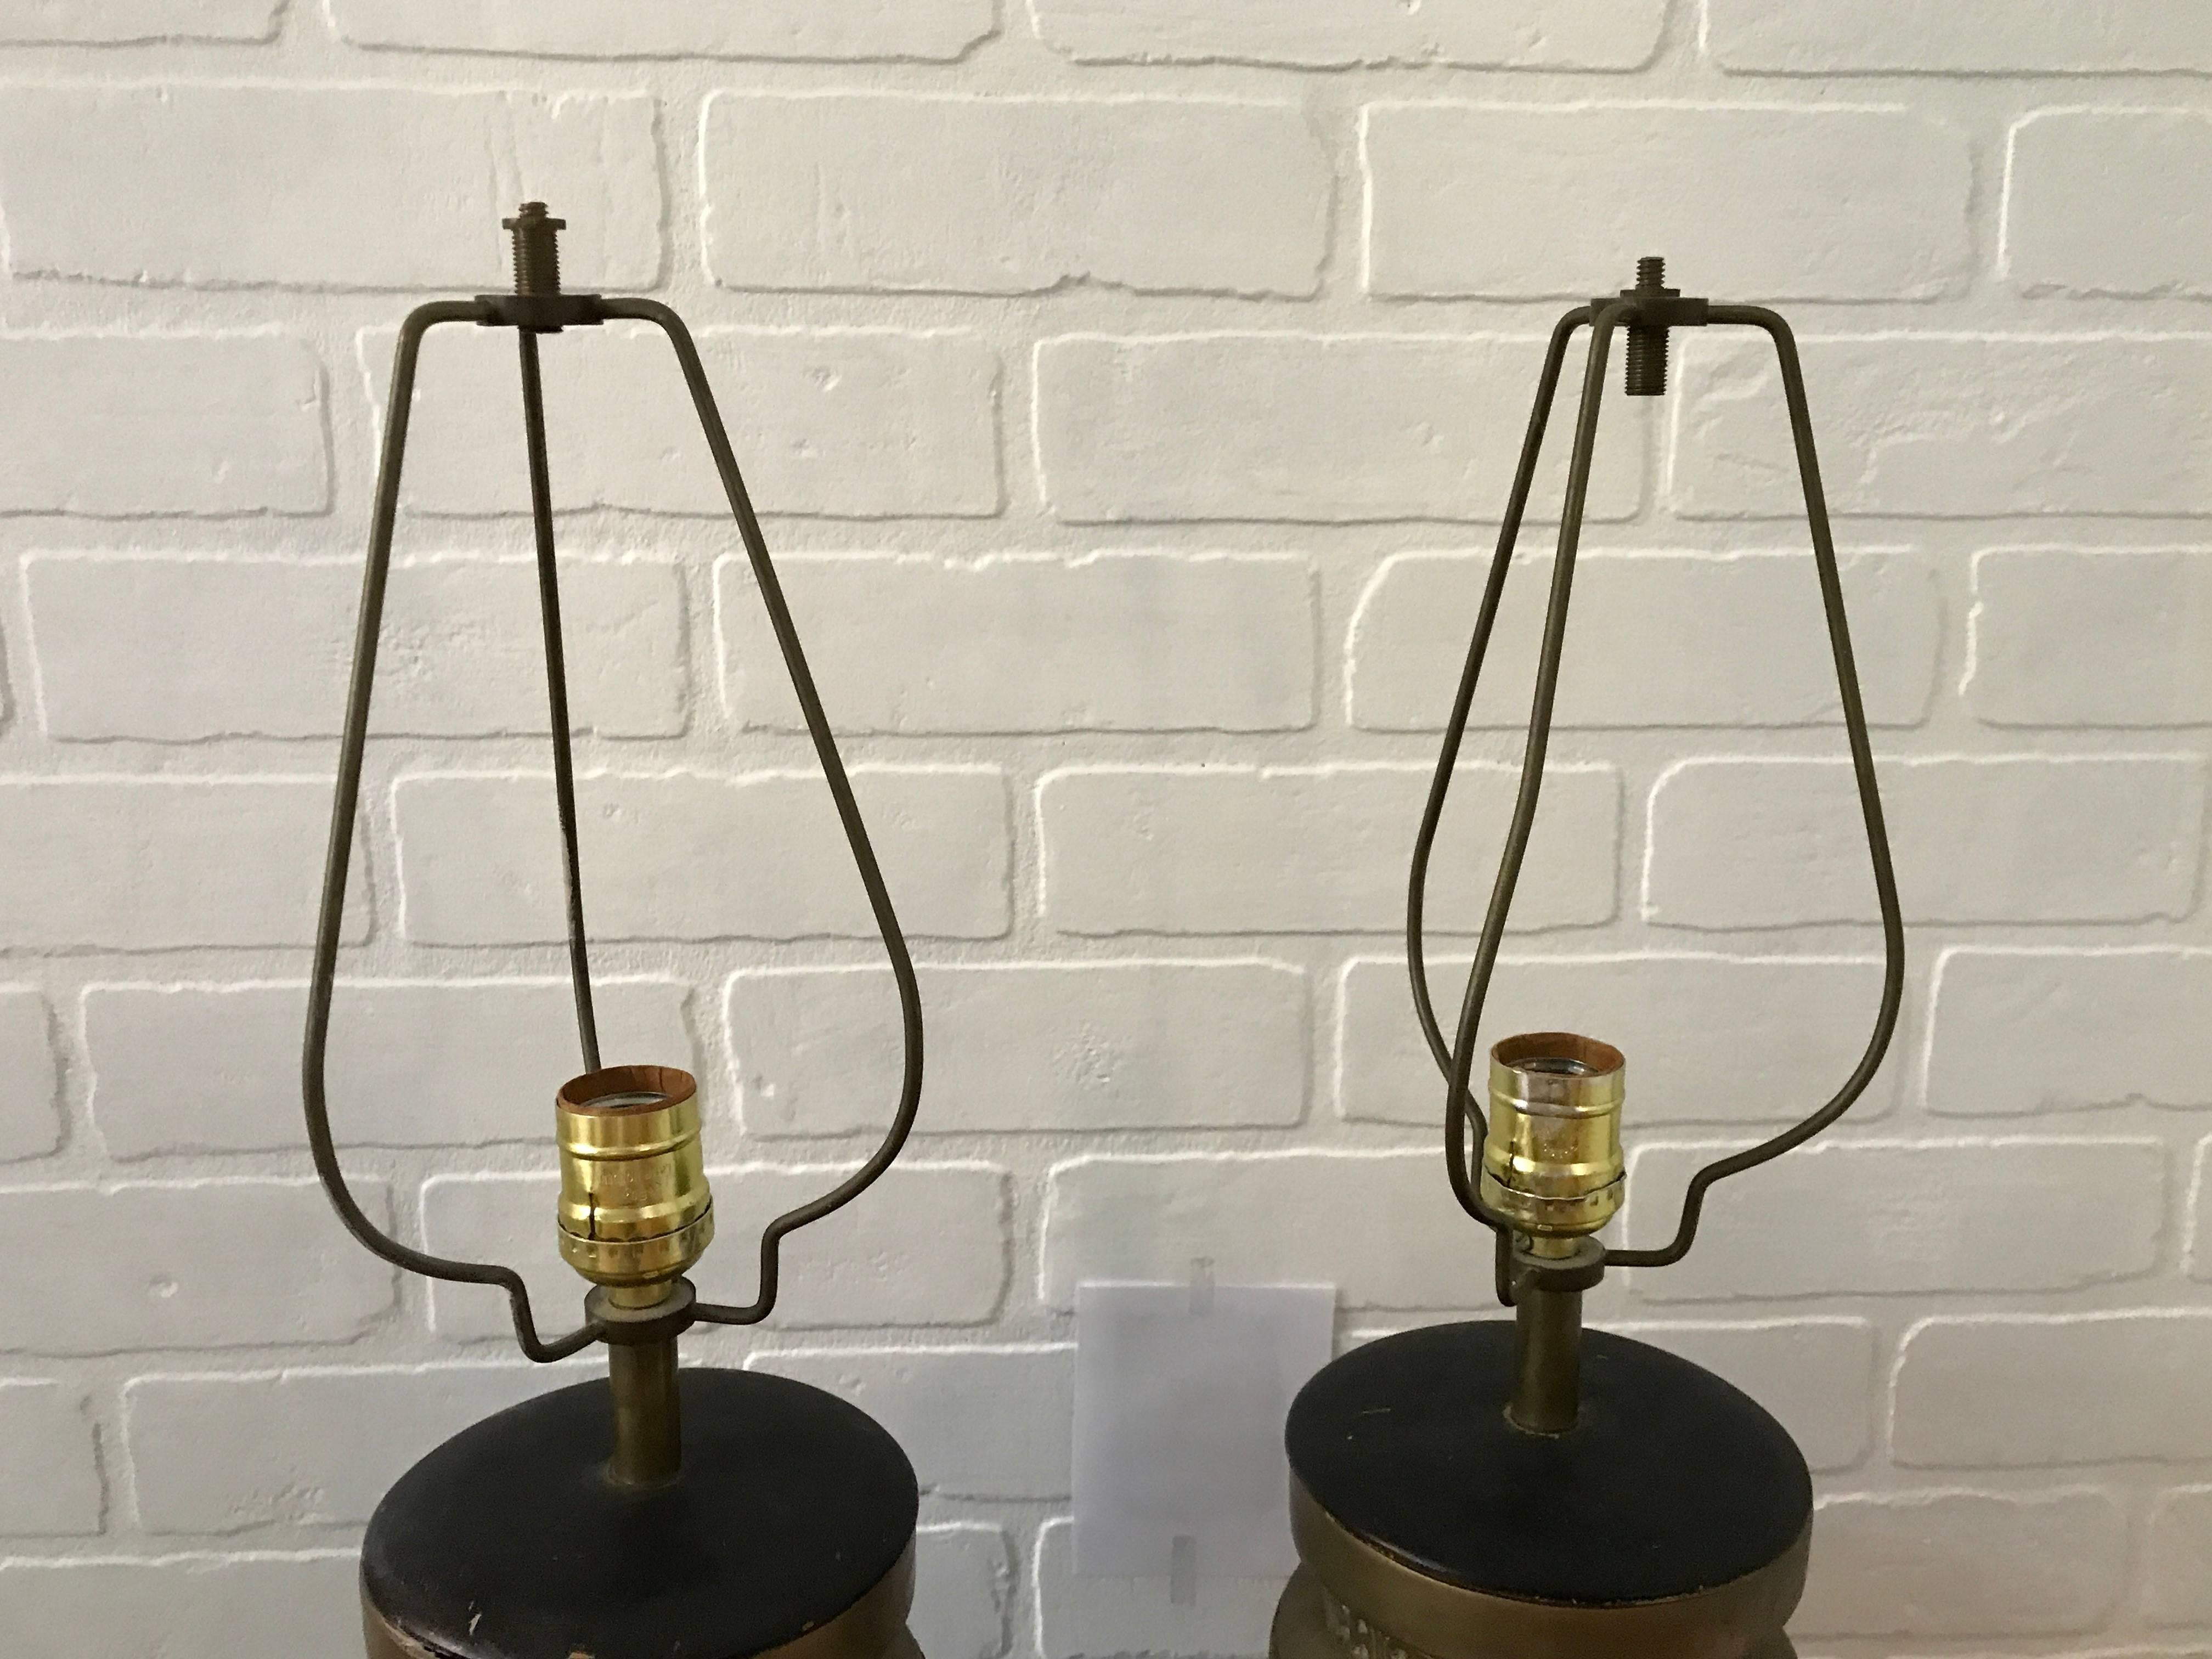 Offered is a stunning and substantial, pair of 1970s James Mont style bronze Asian lamps. Decorative wooden bases. Extremely heavy. 22" from base to socket.